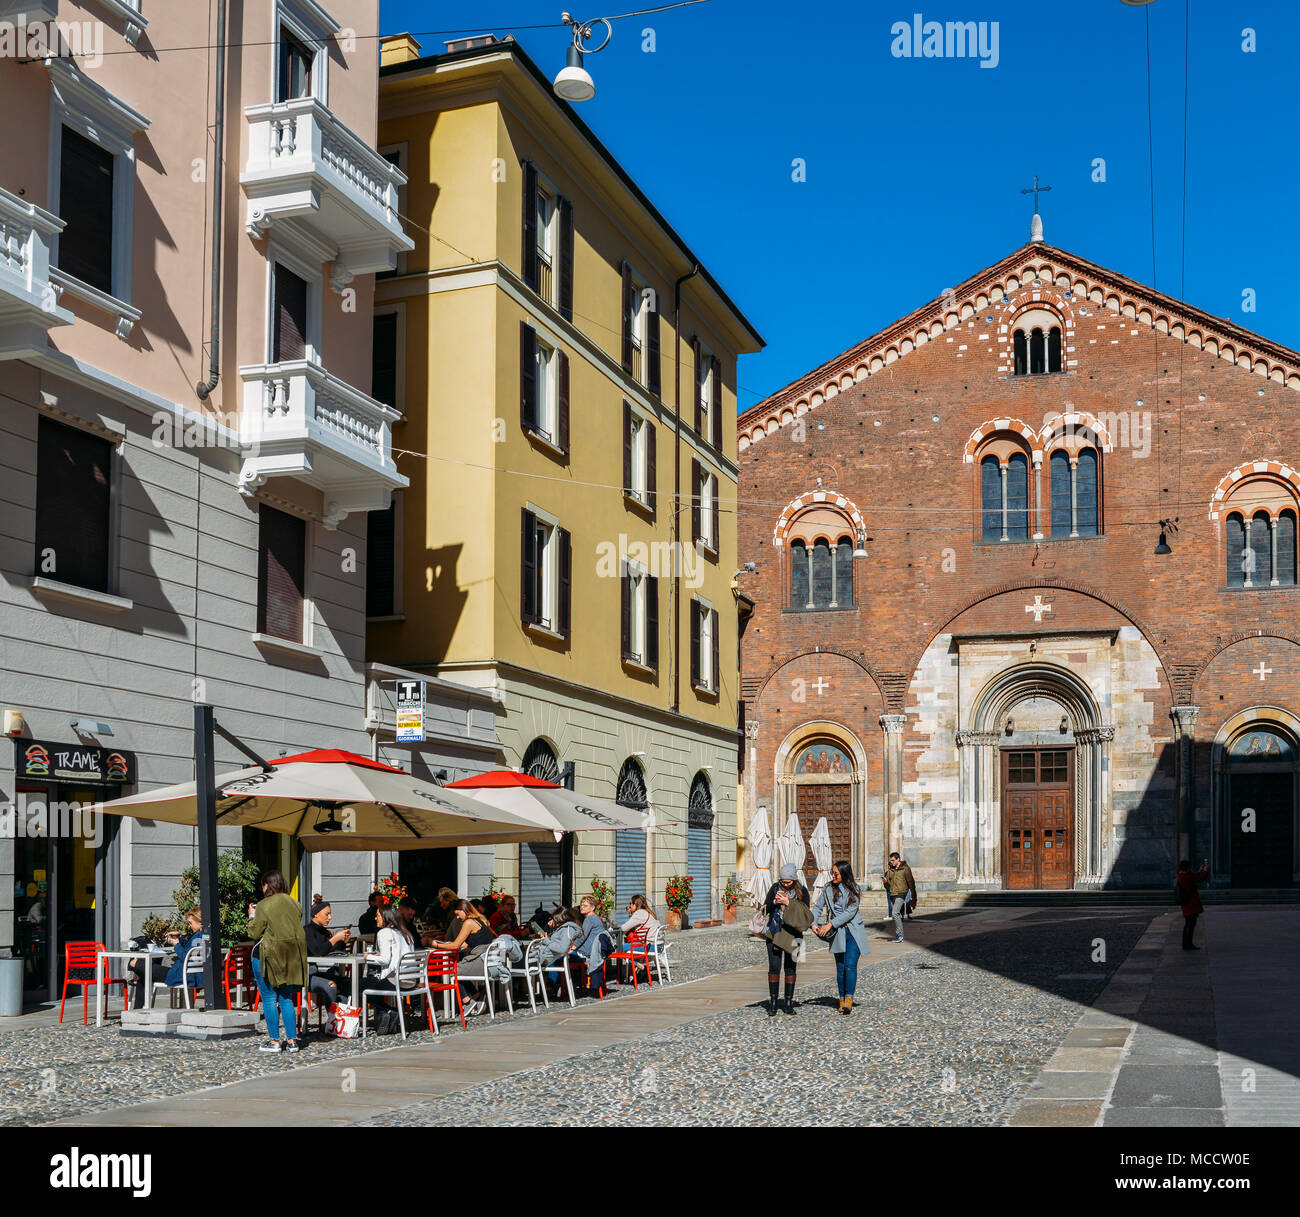 Milan, Italy - April 1st, 2018: People relax at a restaurant terrace in the fashionable Milan district of Brera Stock Photo